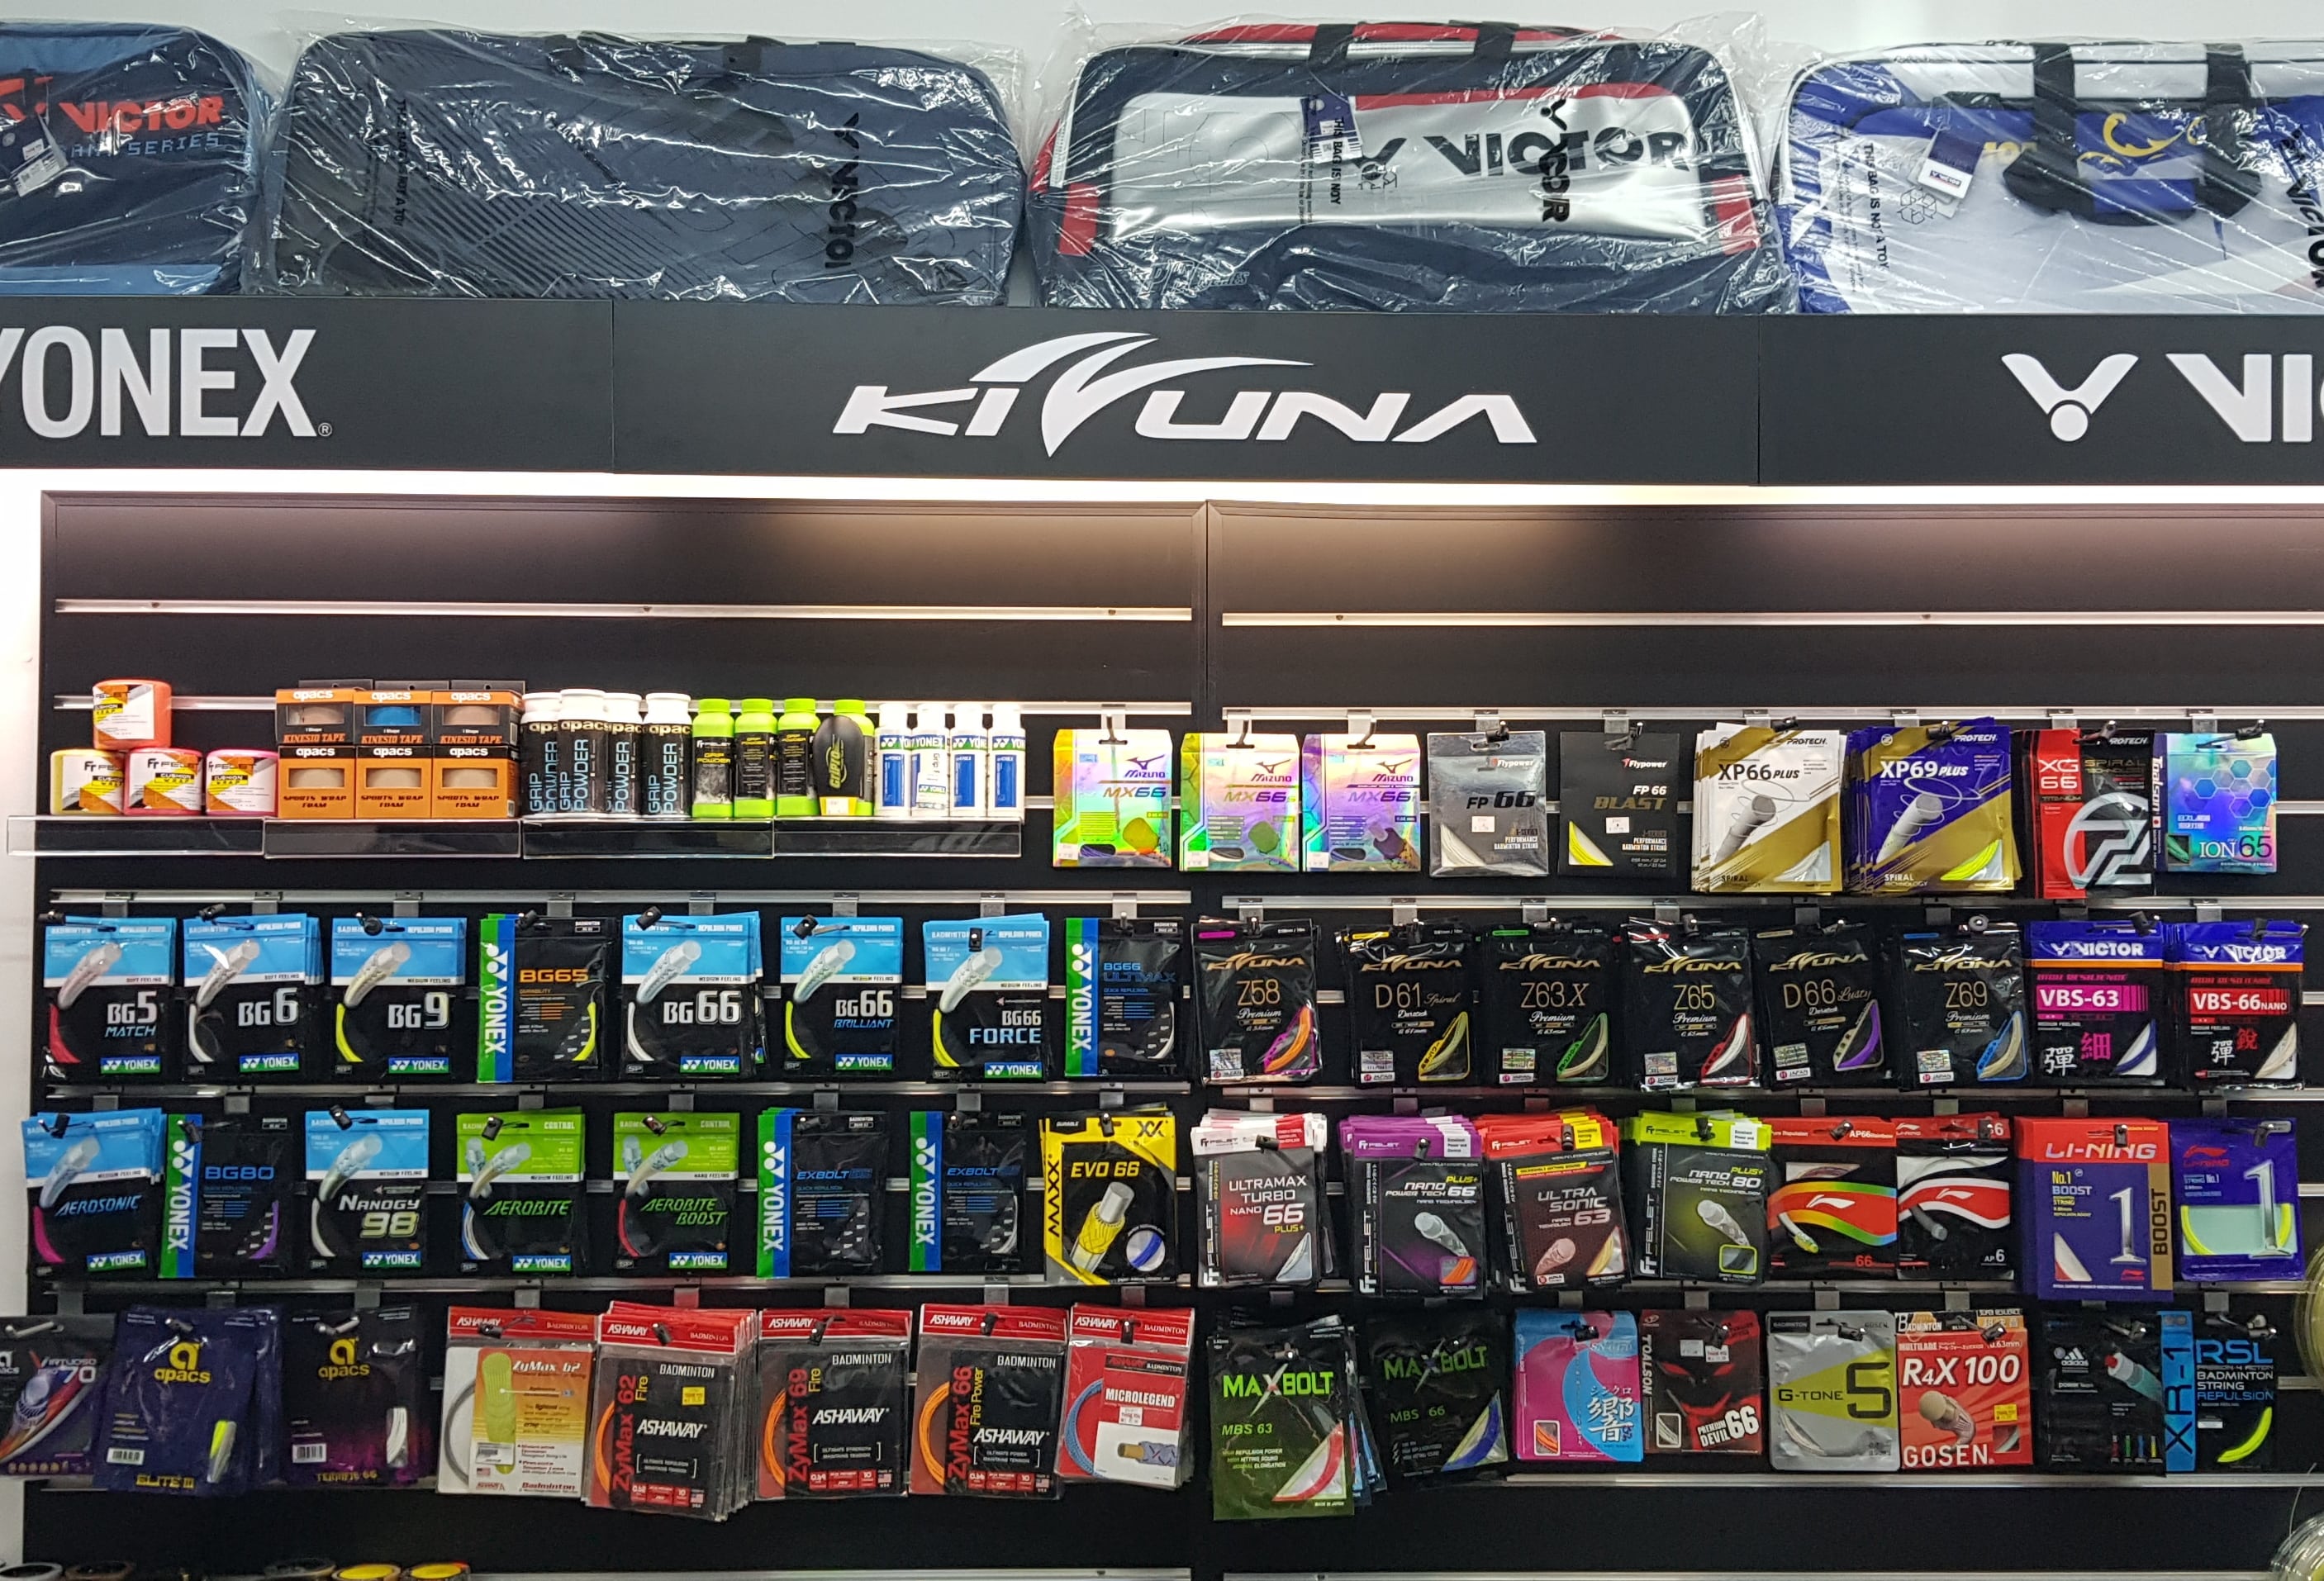 Badminton Strings For Sale at PJ South Outlet